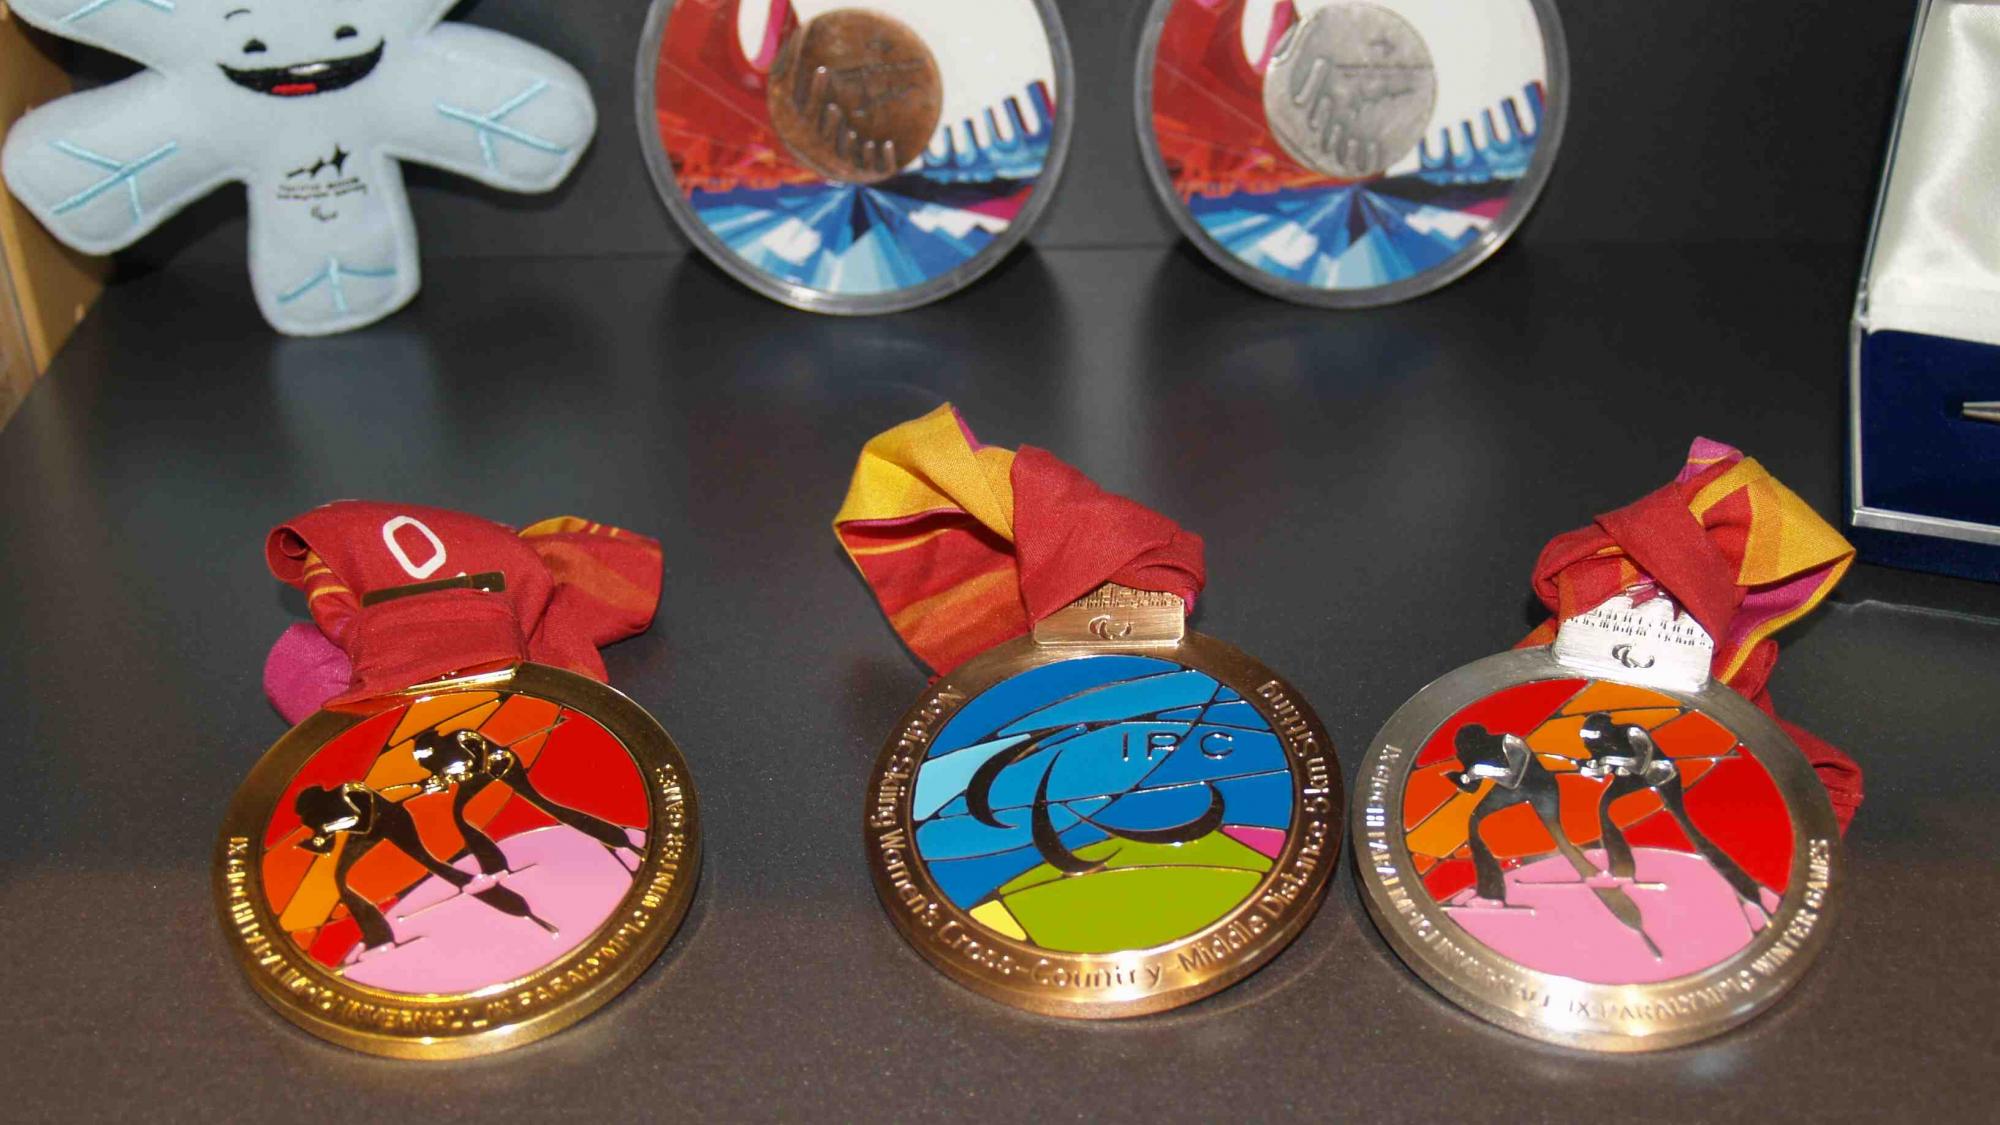 The medals of the Torino 2006 Paralympic Winter Games